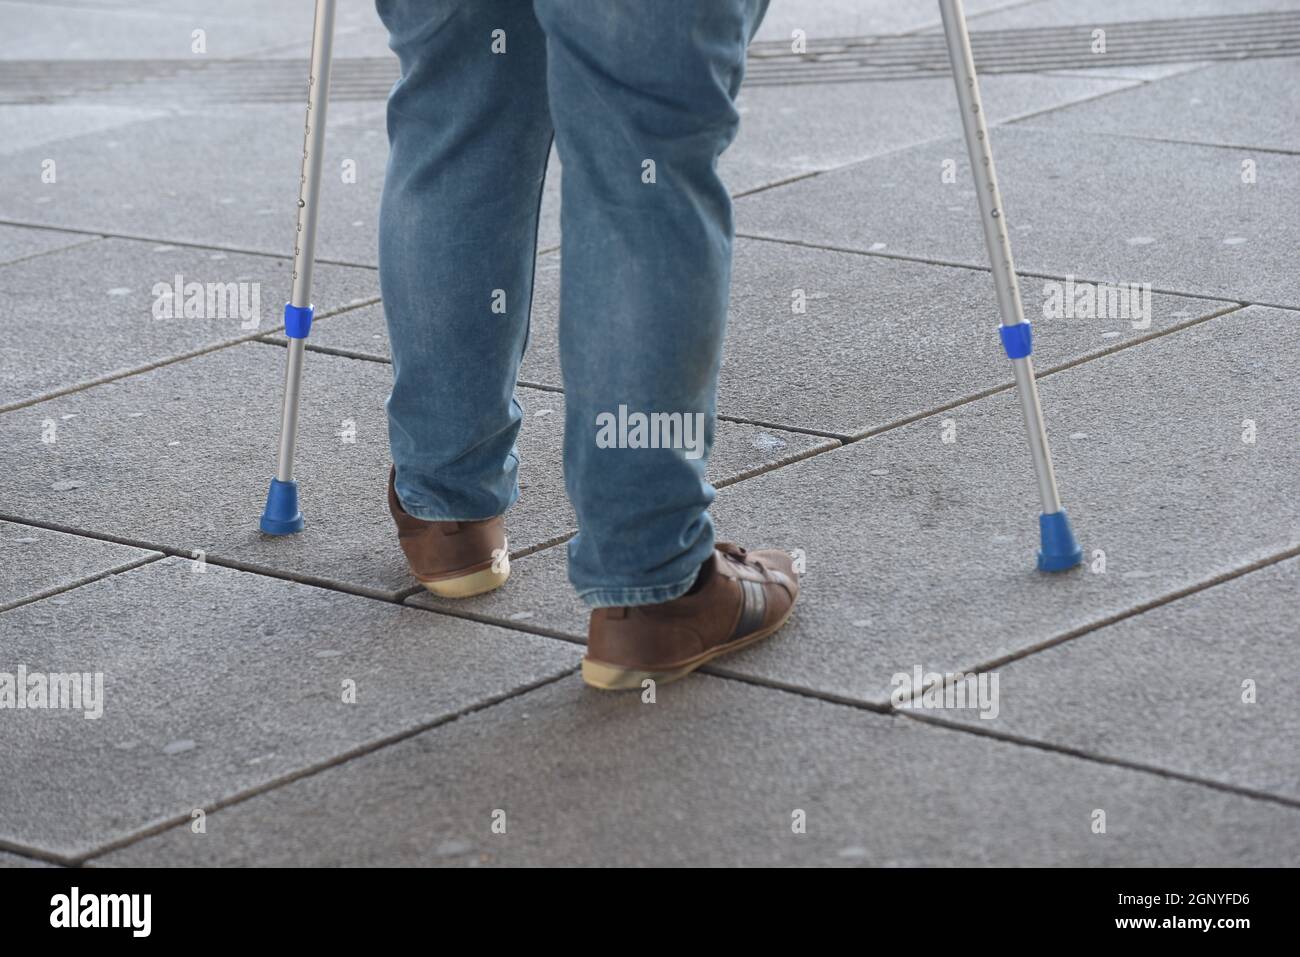 crutches as a walking aid for people with walking disabilities Stock Photo